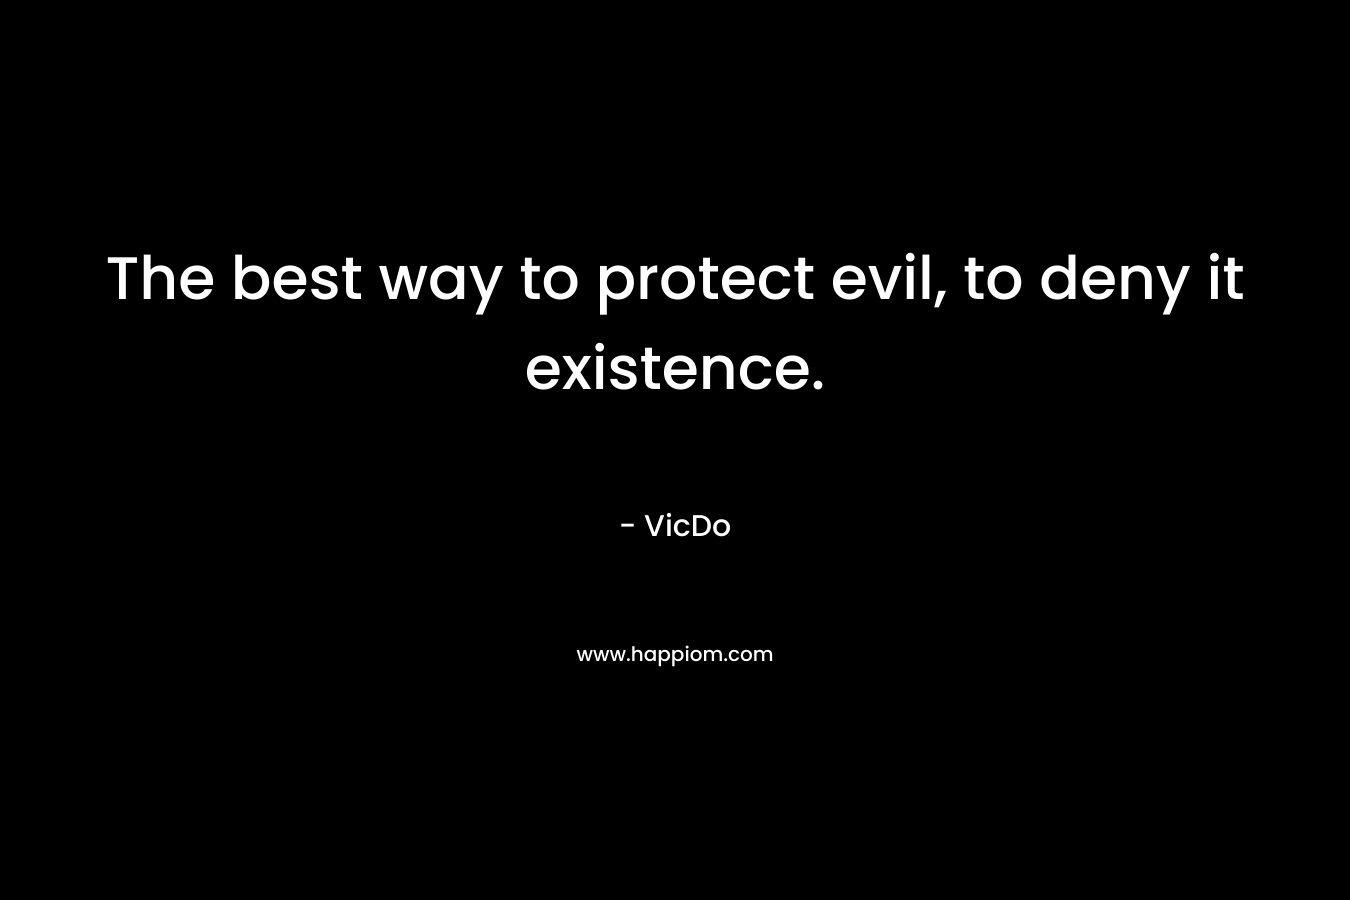 The best way to protect evil, to deny it existence. – VicDo